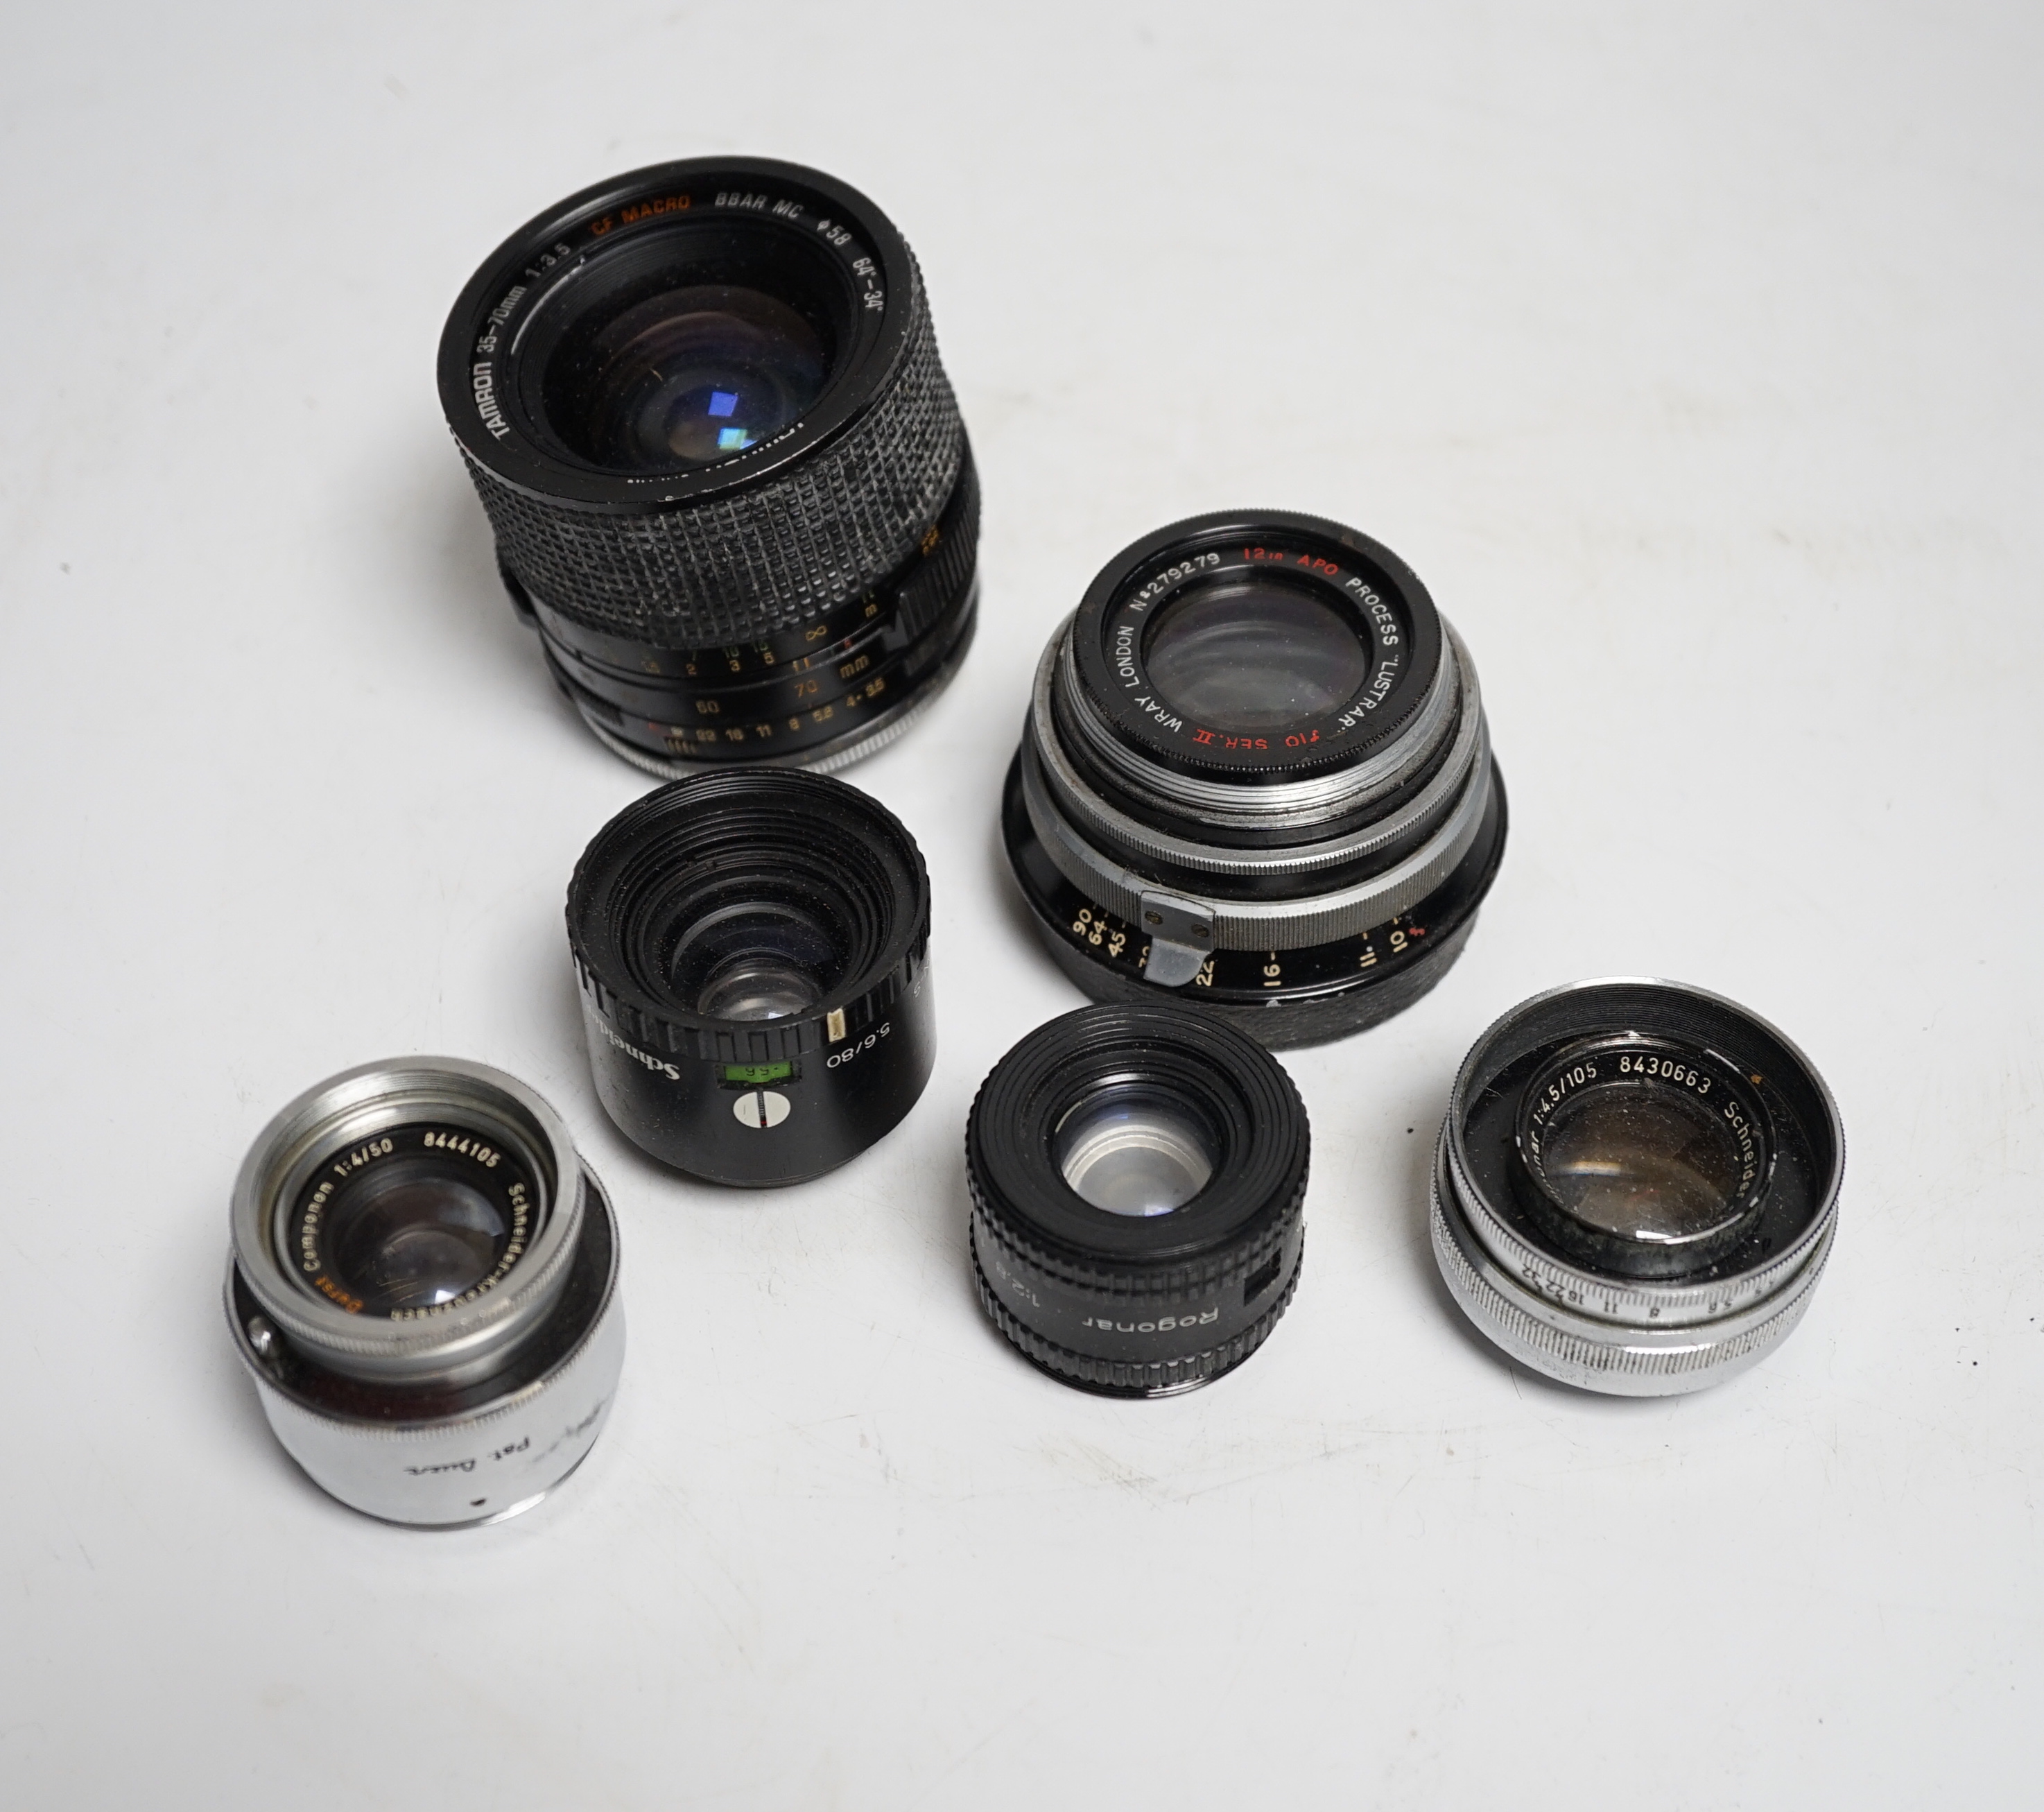 A collection of lenses for still cameras, including examples by Schneider-Kreuznach, Wray, Aldis, Tamron, etc.